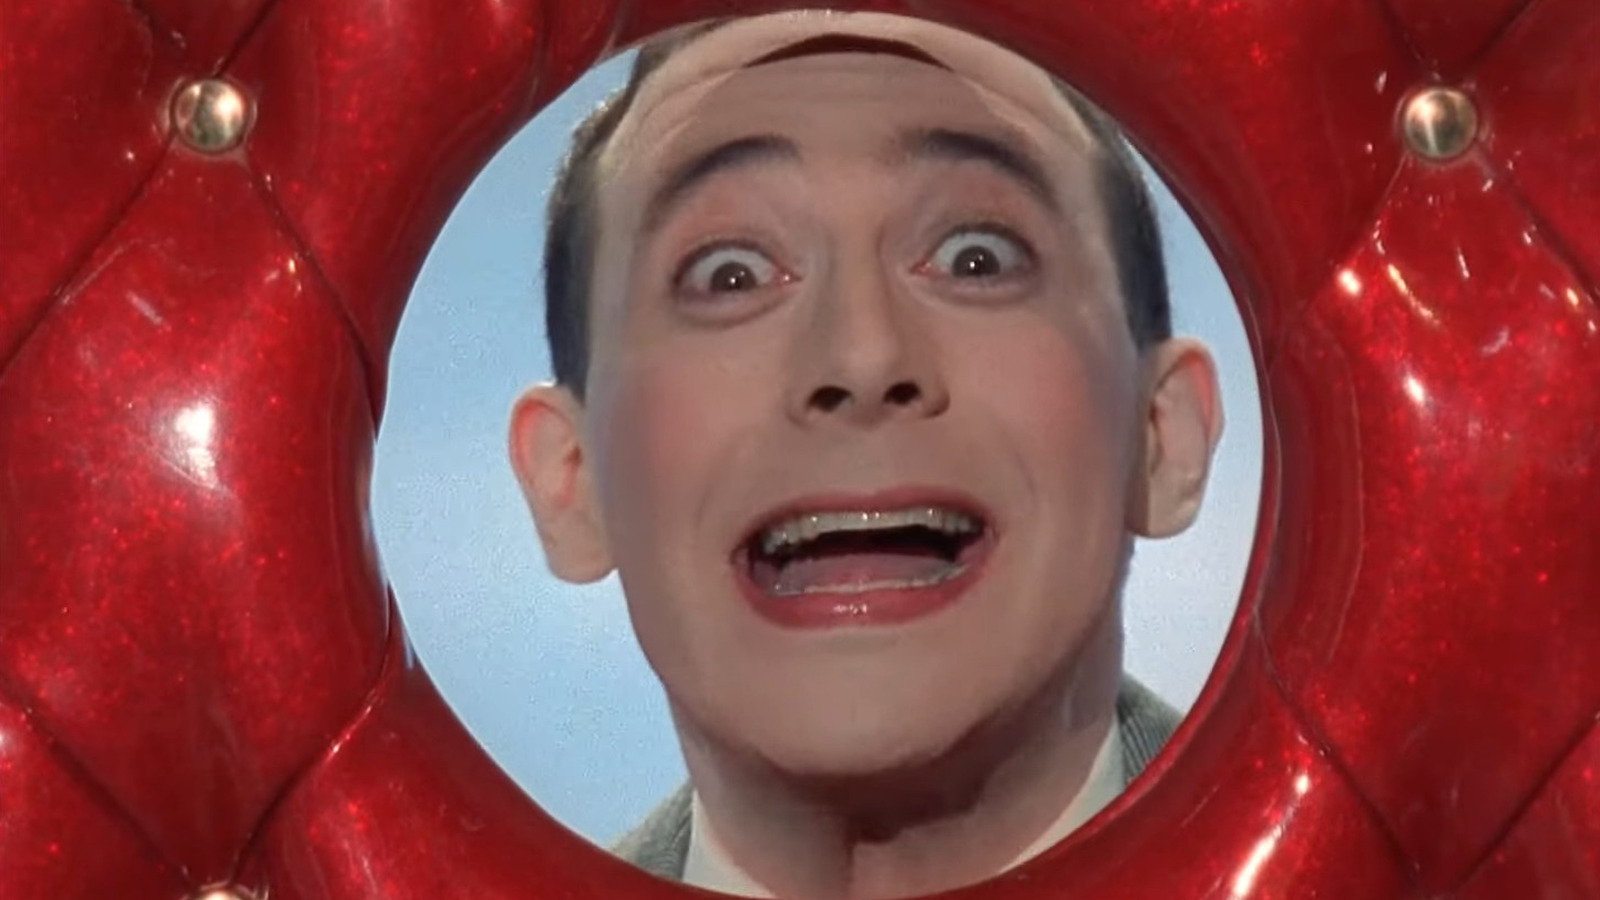 The Pee-Wee Herman Episode That Upset Fans (And Got Censored)